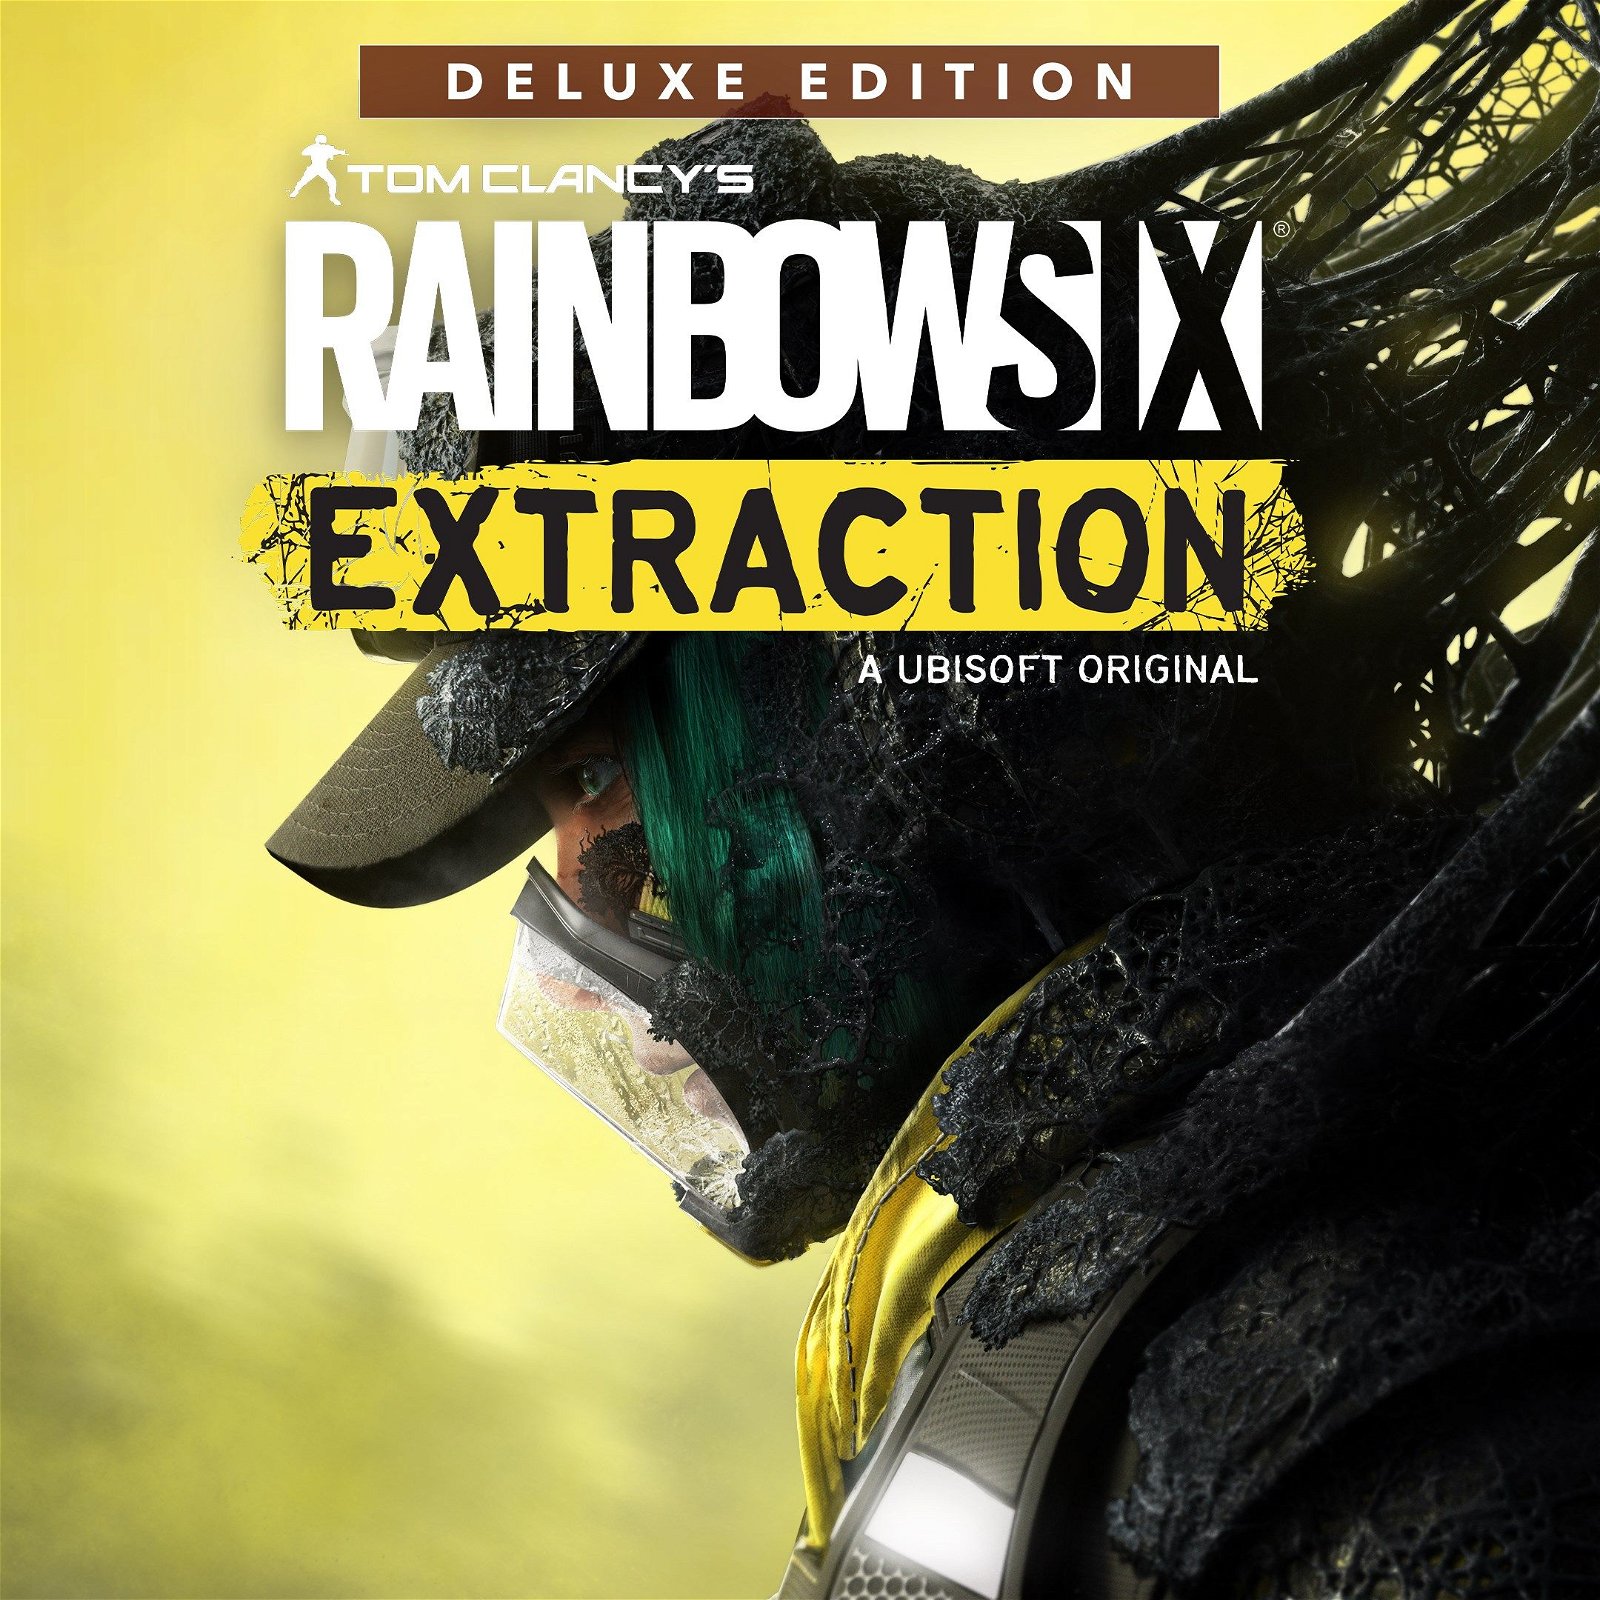 Image of Tom Clancy’s Rainbow Six Extraction Deluxe Edition